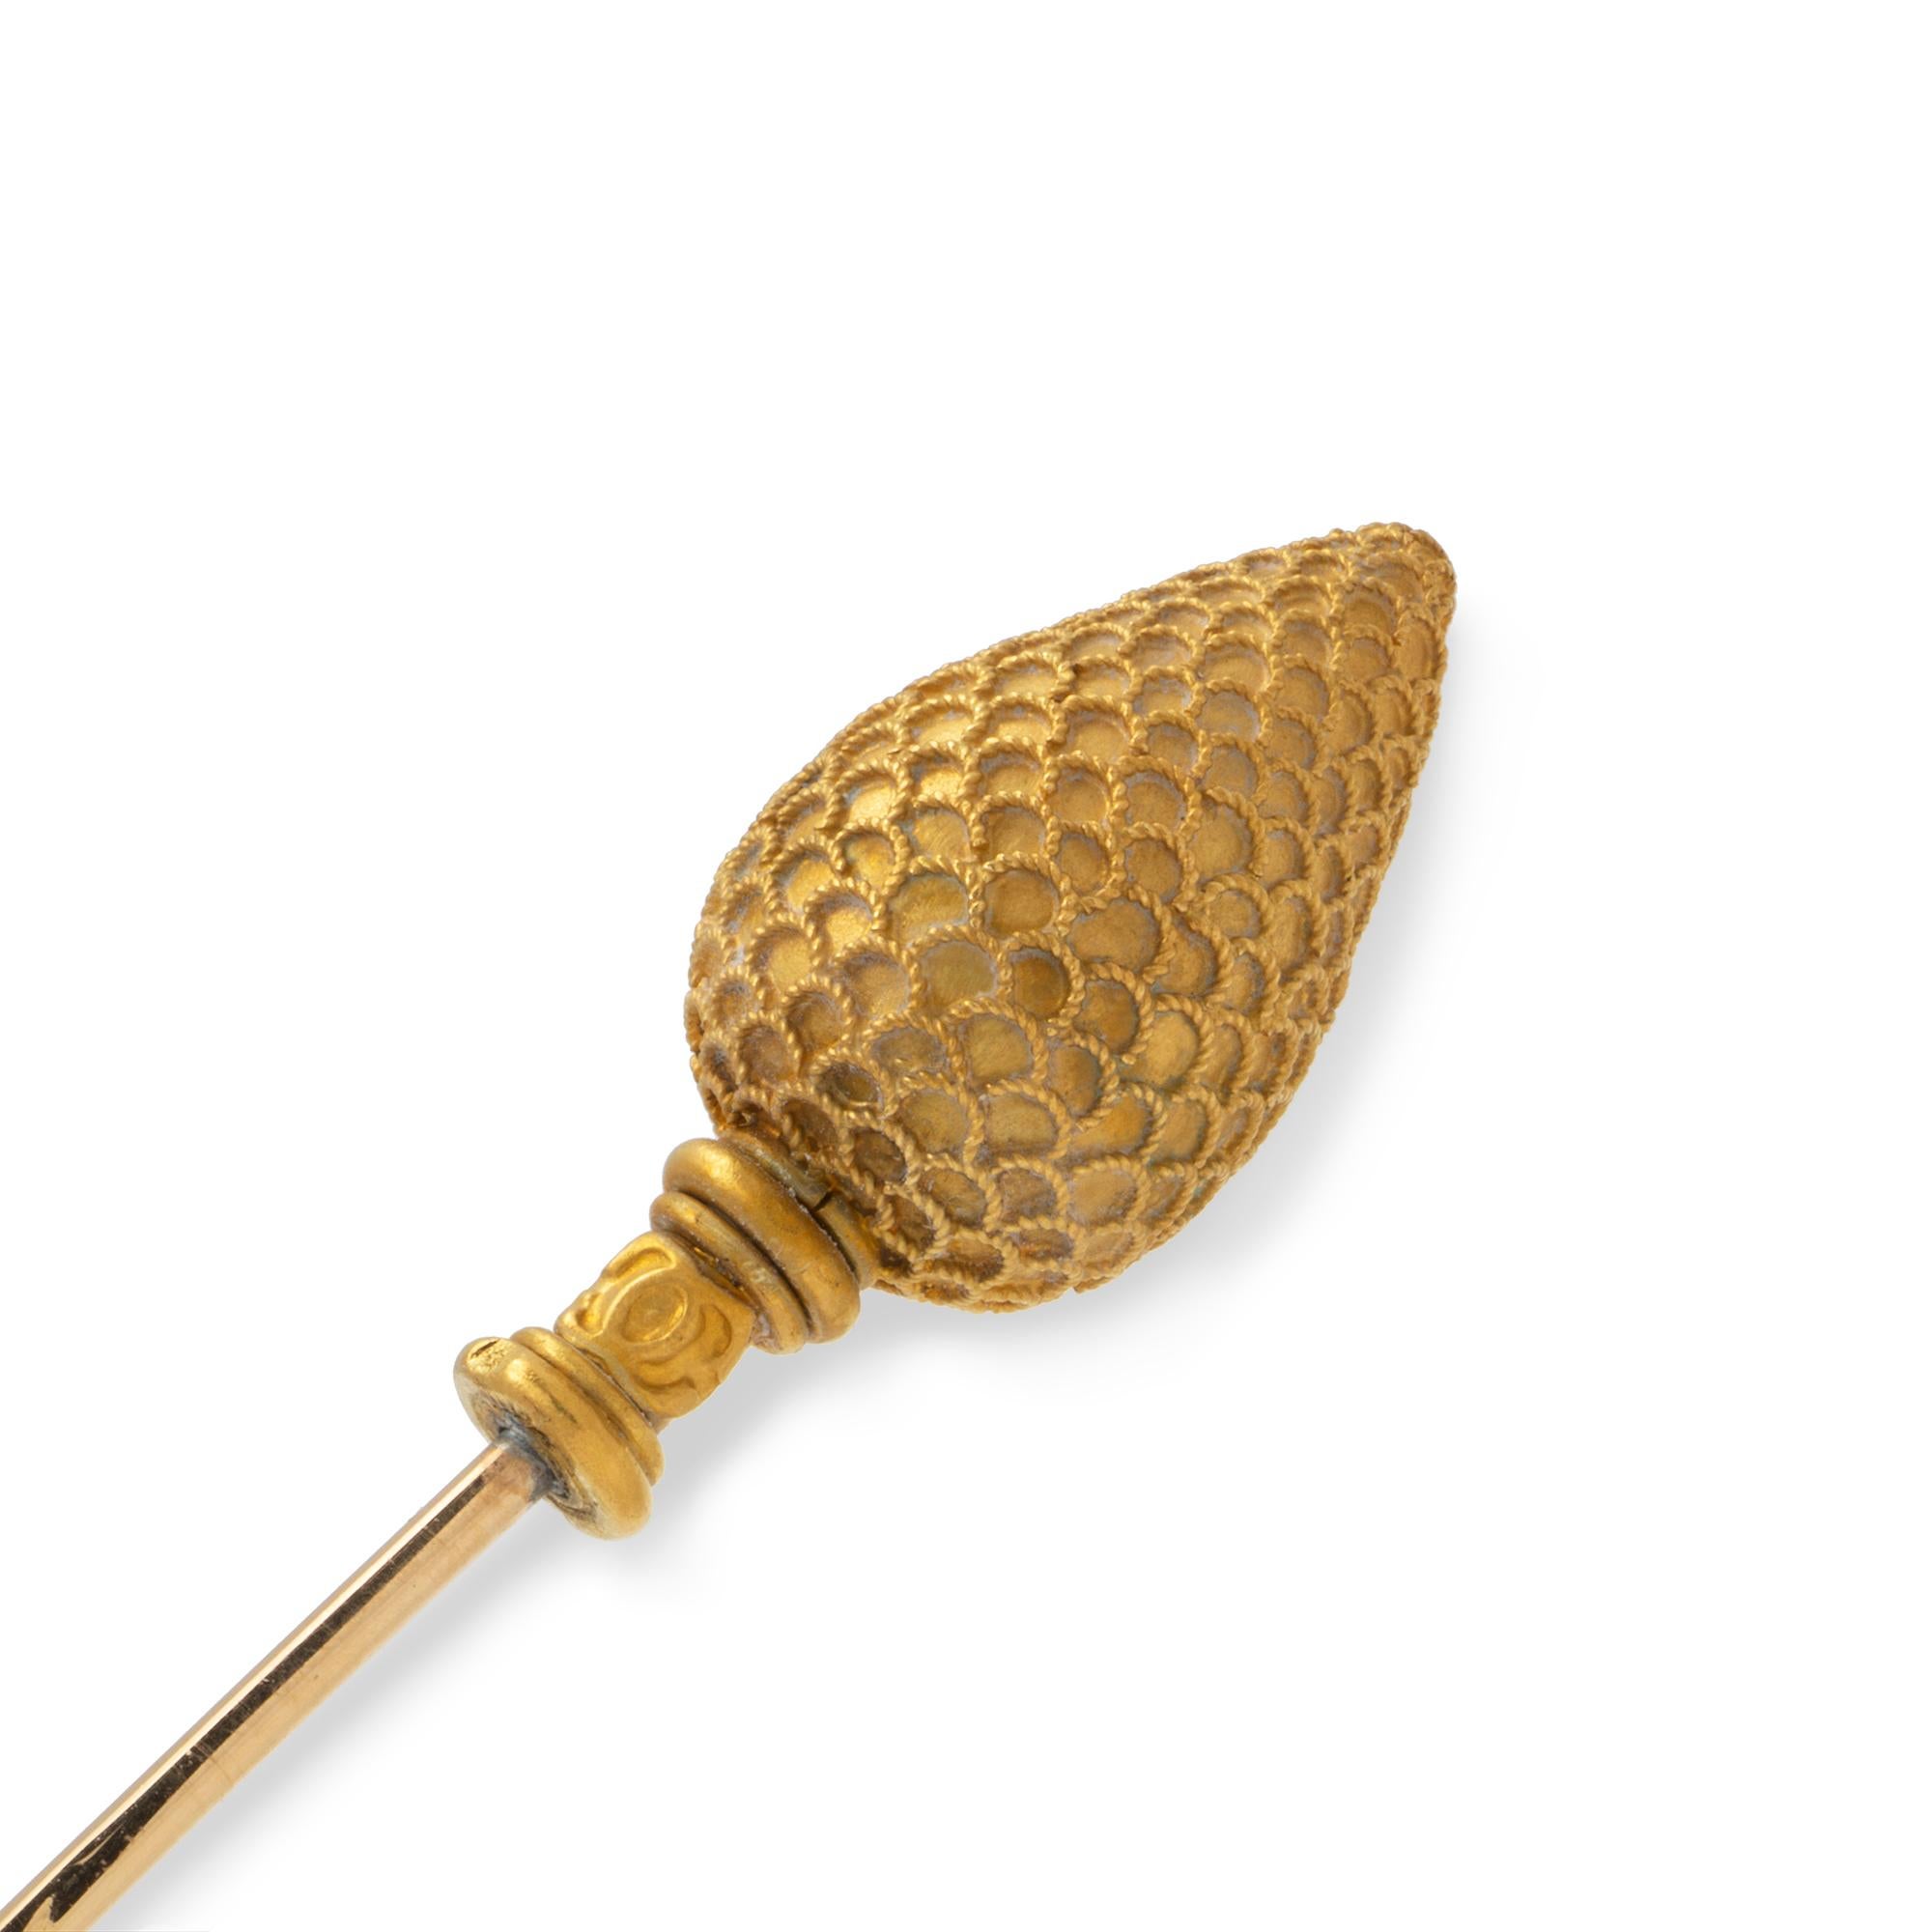 A Castellani gold stick-pin, the head in the form of a pine cone with twisted wirework decorations, bearing the double C’s hallmark on the base, all to a yellow gold pin, circa 1860, gross weight 4.7 grams.

A collectable stick pin in the form of